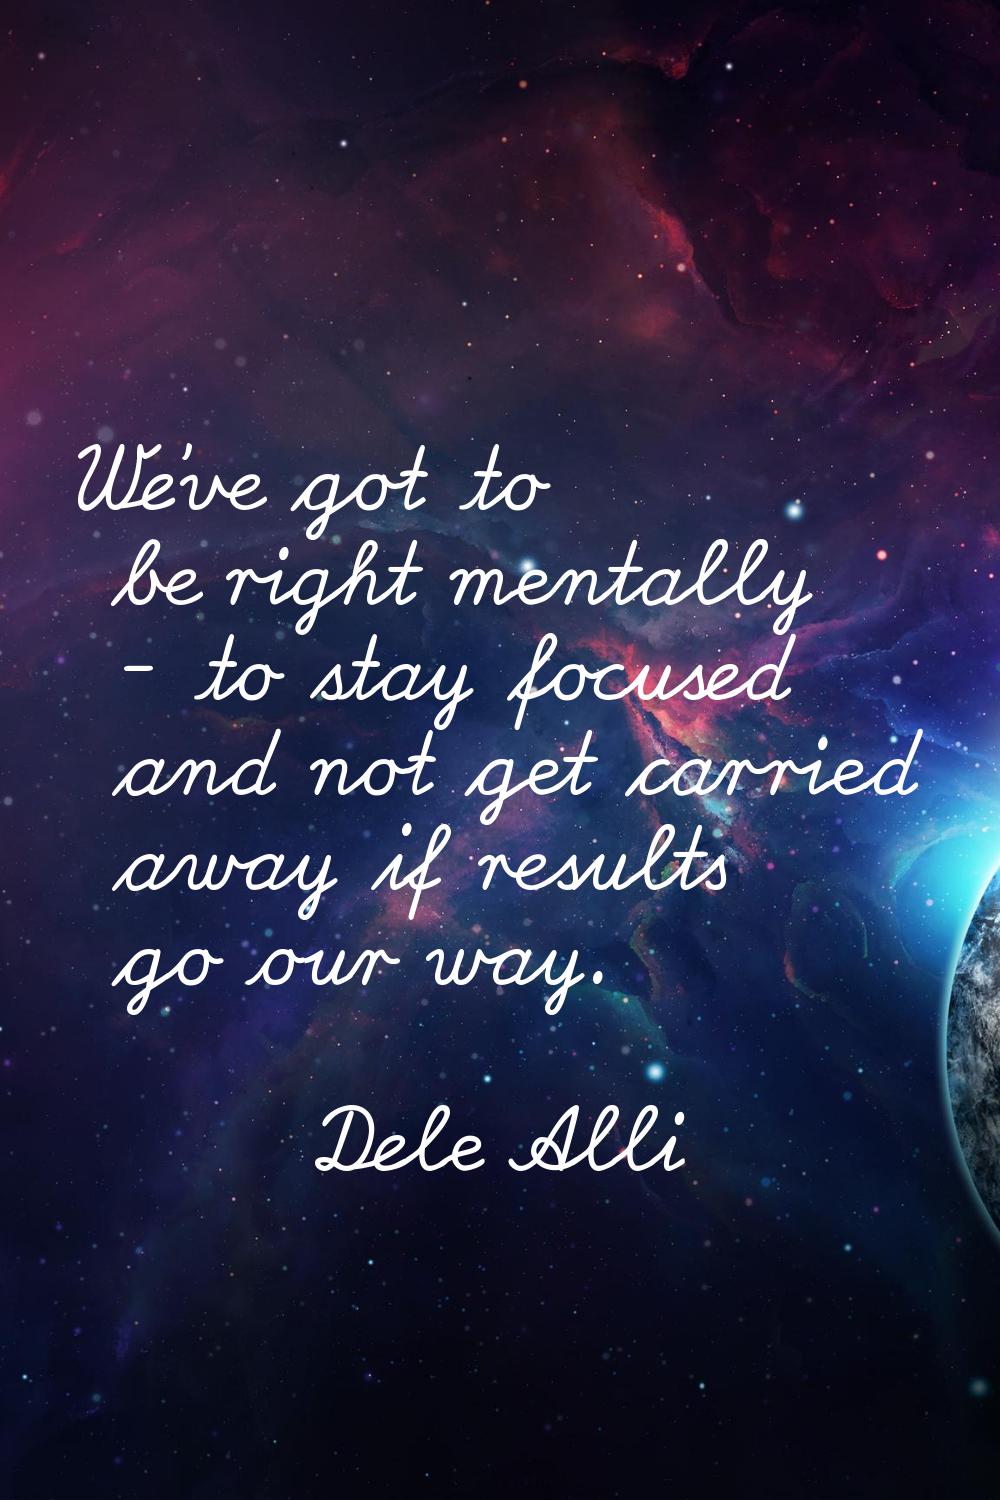 We've got to be right mentally - to stay focused and not get carried away if results go our way.